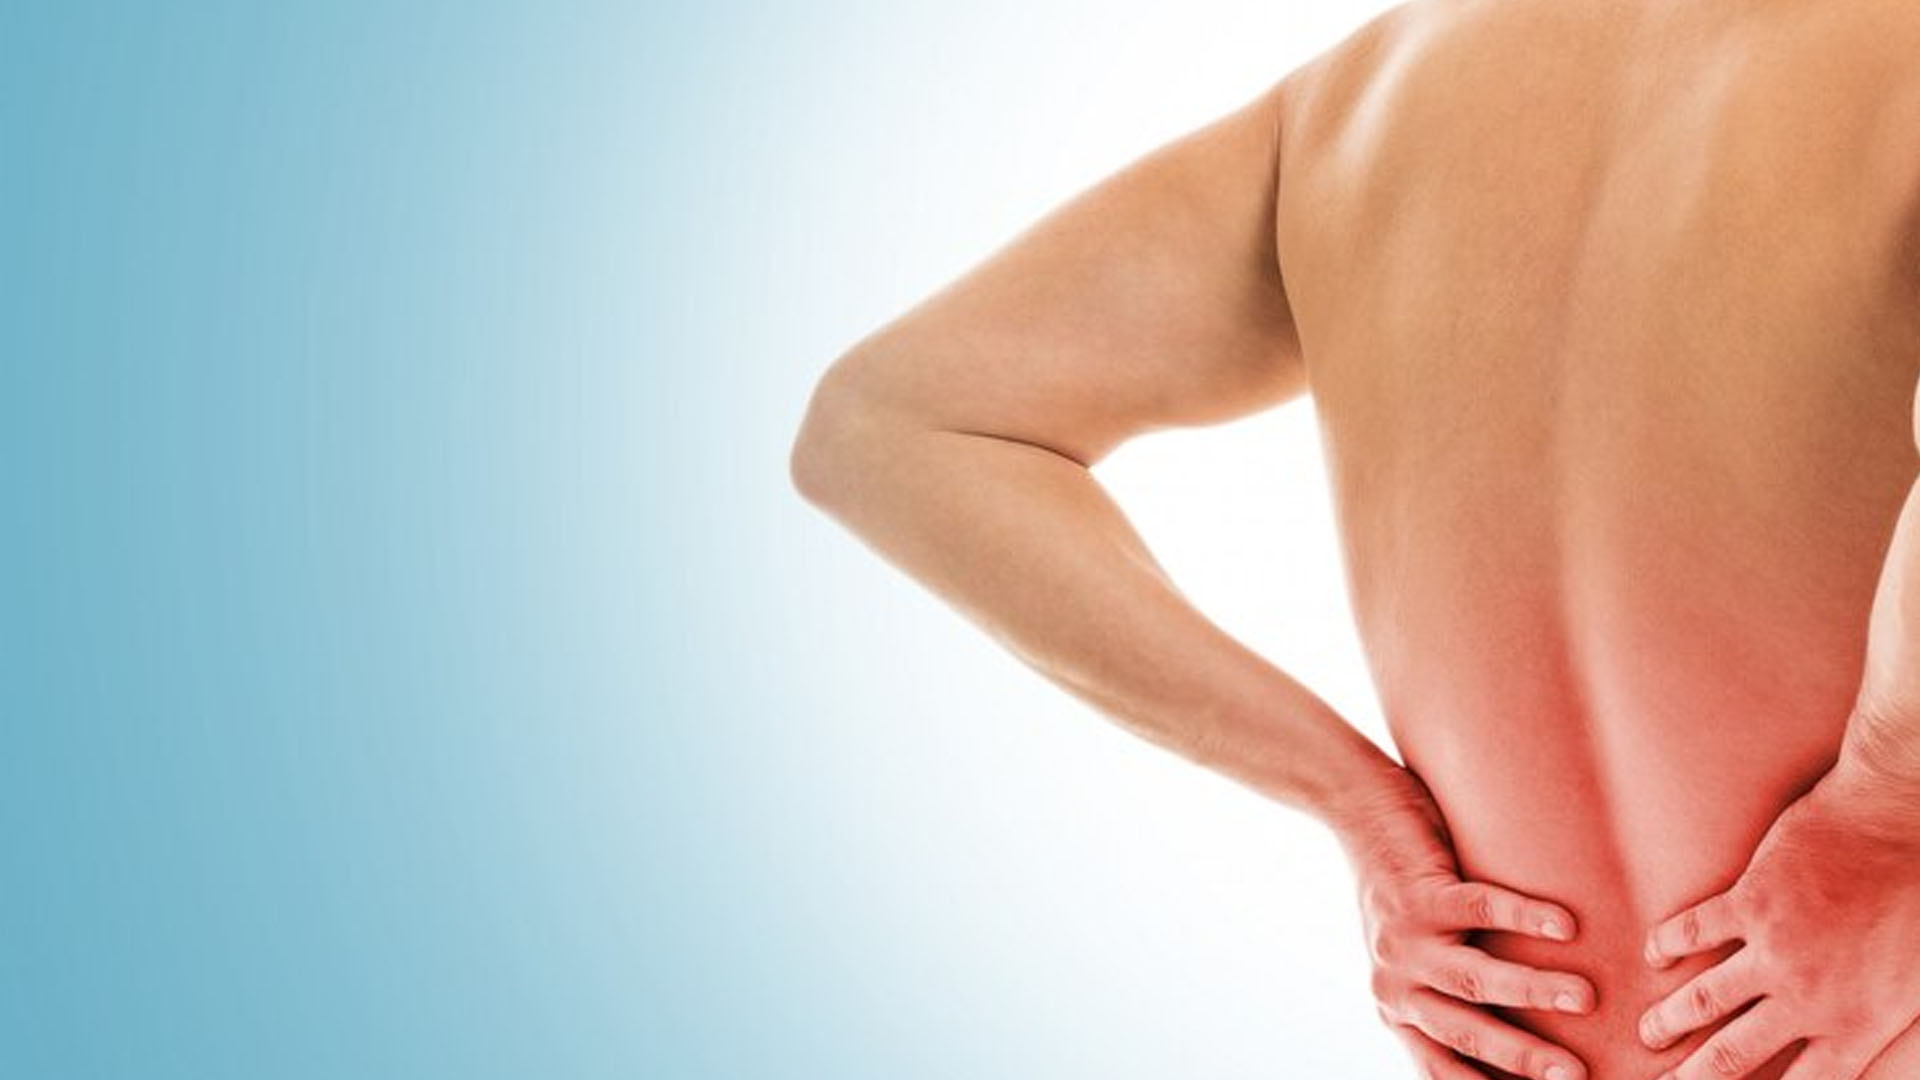 What are the Home Remedies to reduce Back Pain?